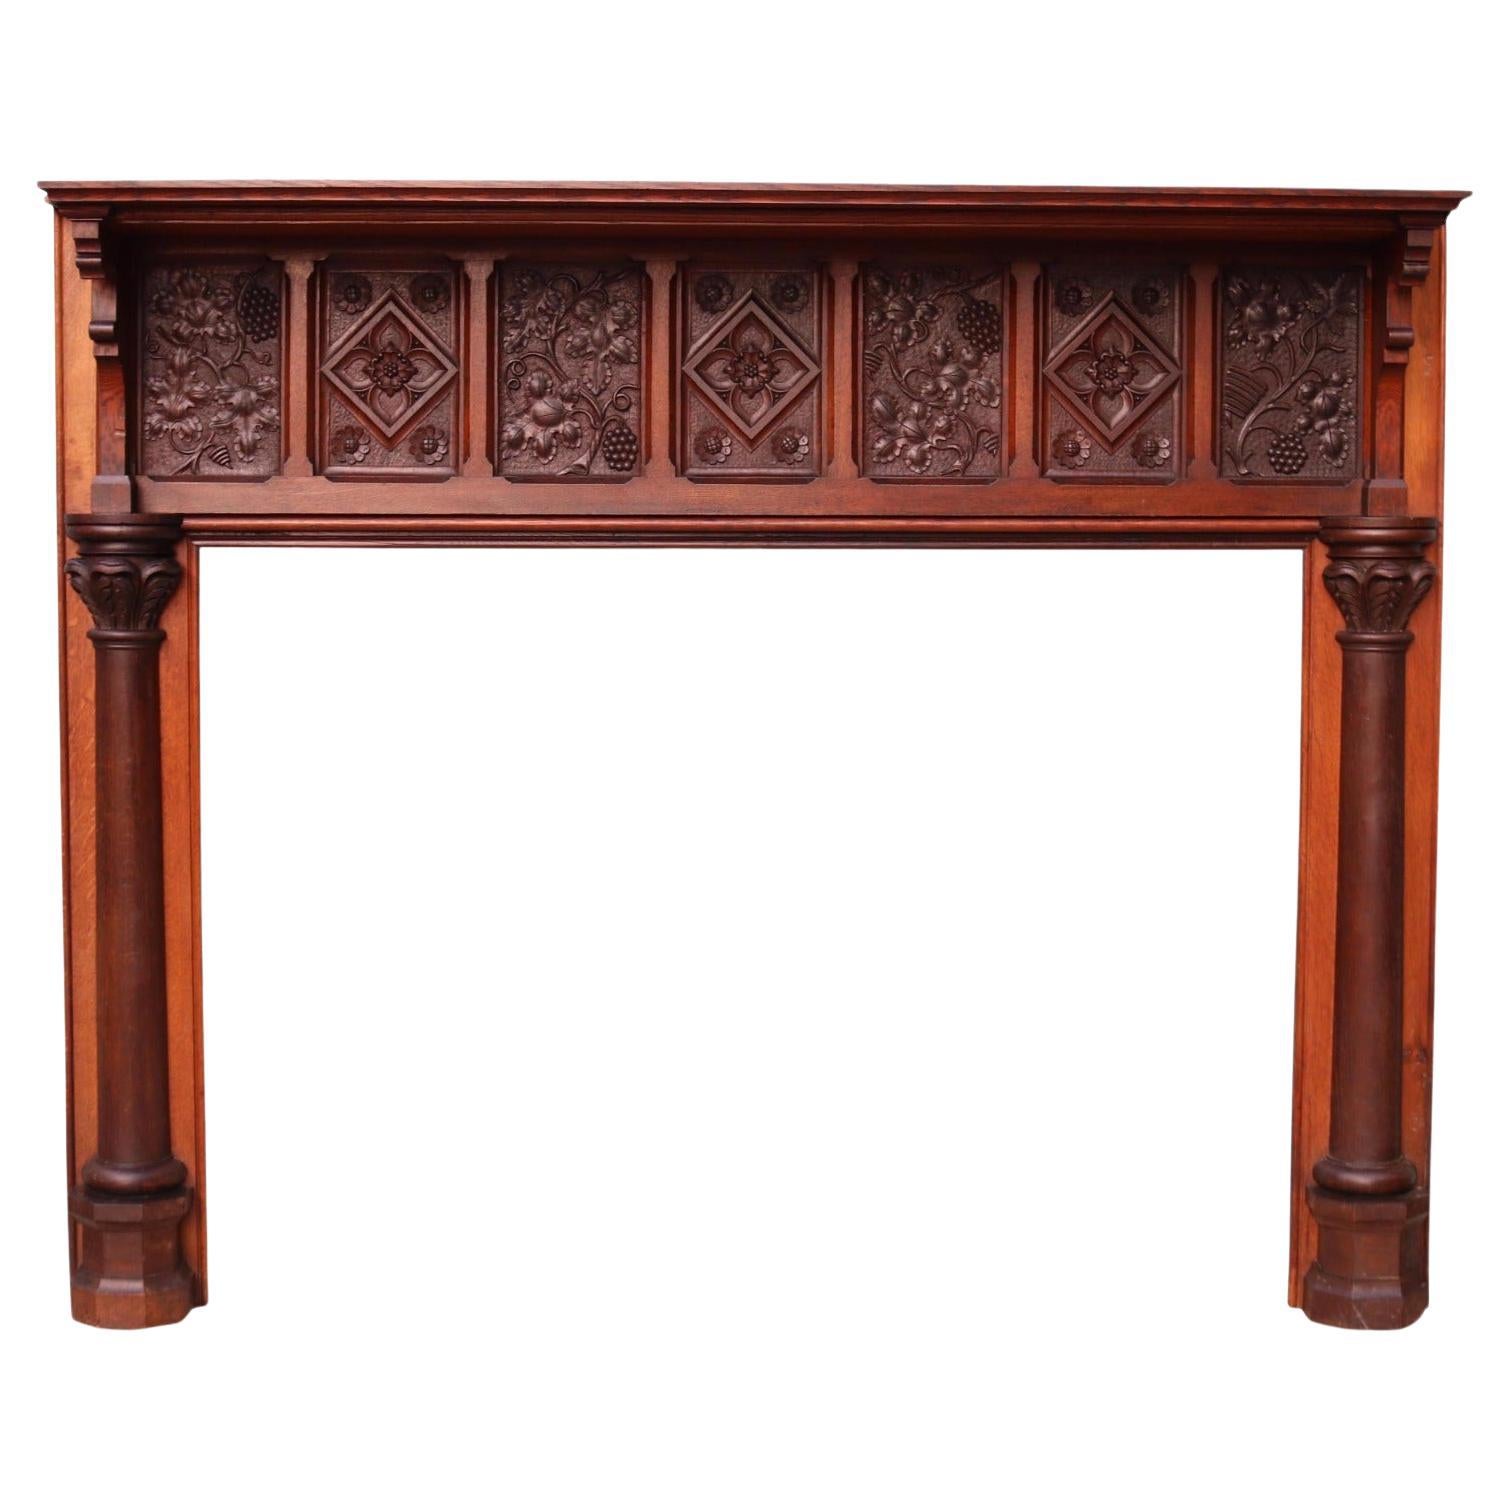 English Arts and Crafts Style Carved Oak Fireplace For Sale